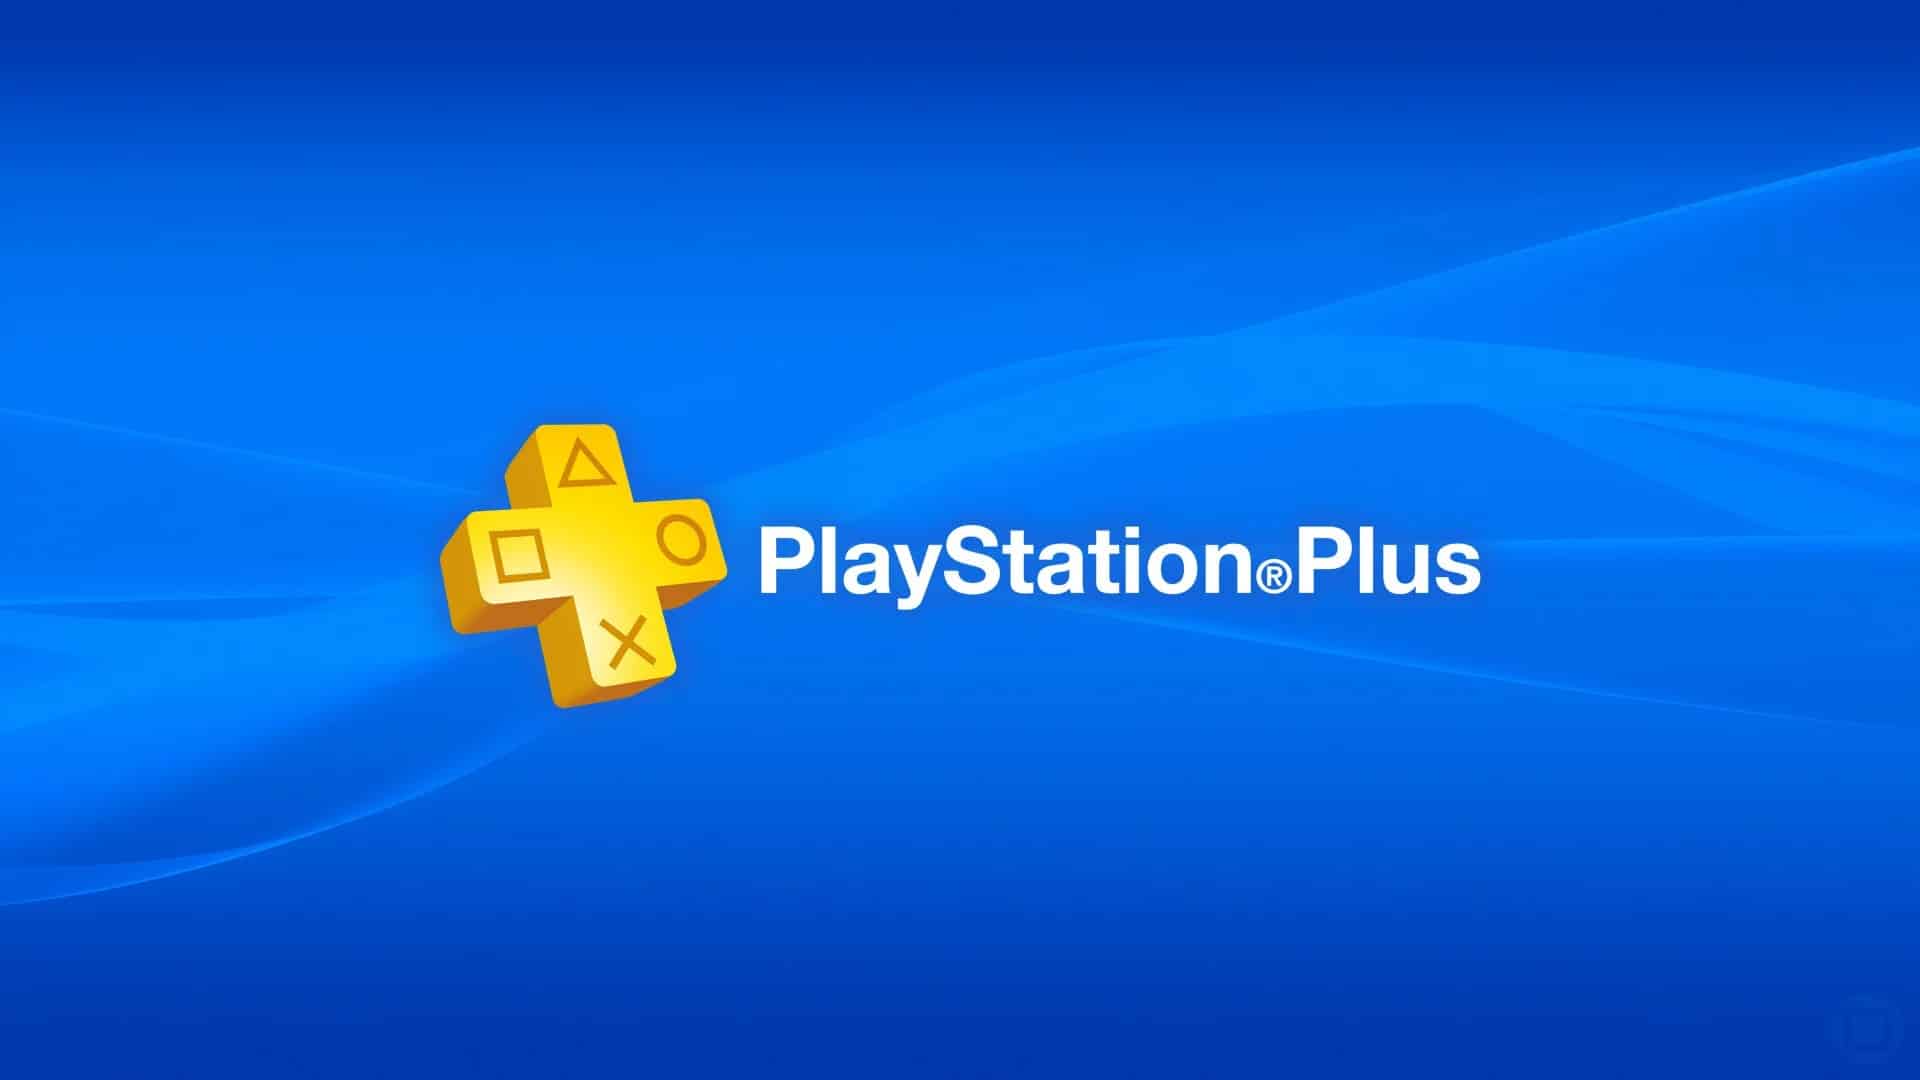 The February 2021 PlayStation Plus Lineup Includes Control, Destruction AllStars and More